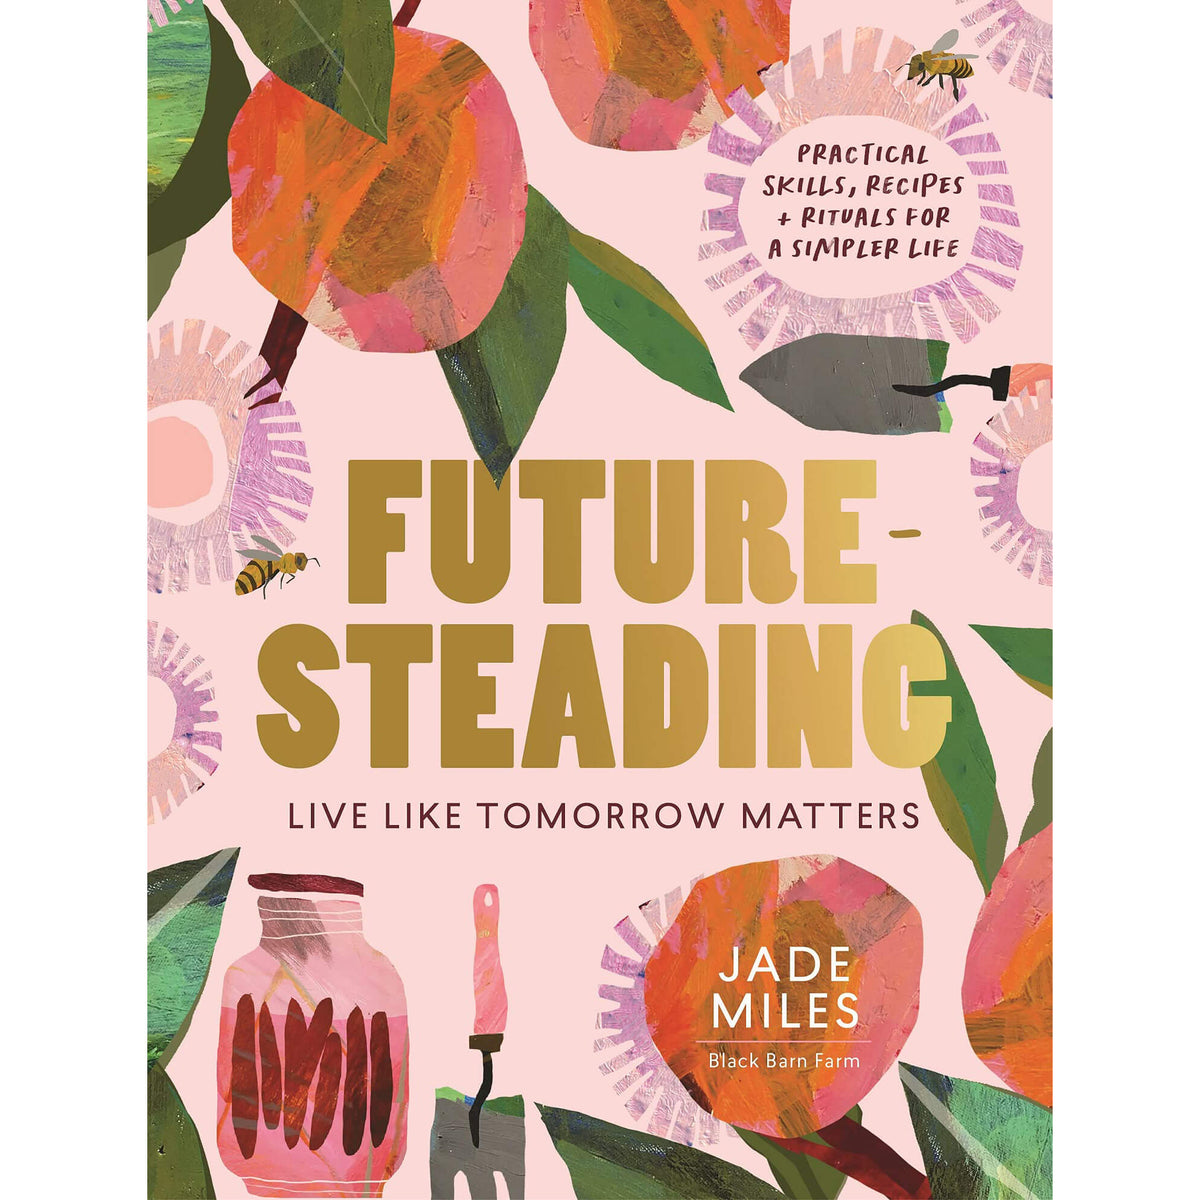 Futuresteading Live like tomorrow matters: Practical skills, recipes and rituals for a simpler life front cover.